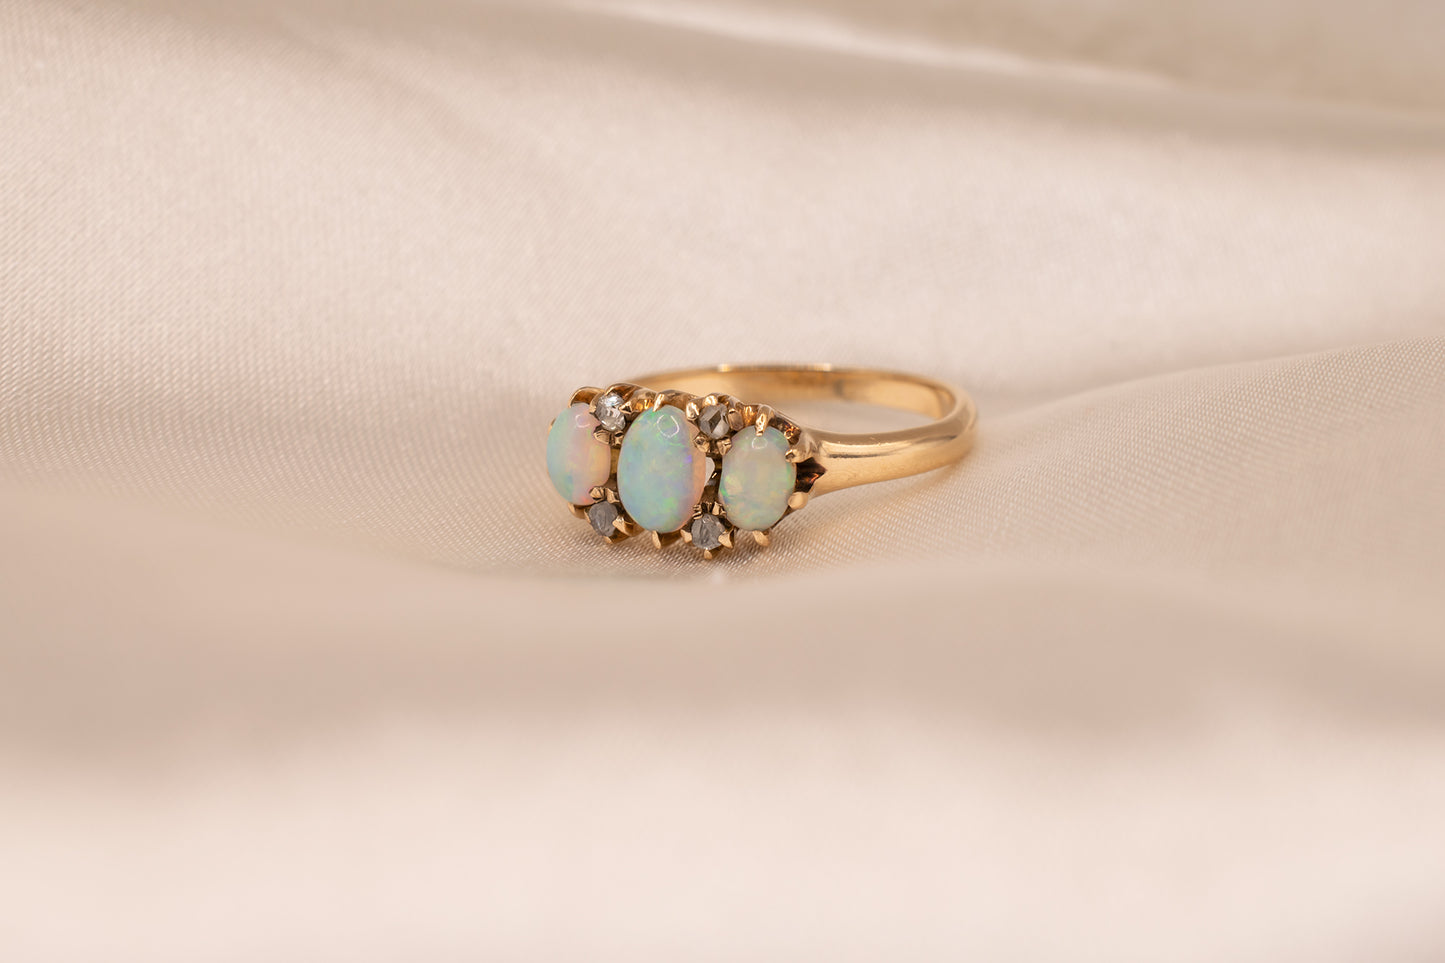 Antique Victorian Era 14k Yellow Gold Oval Shape Opal And Rose Cut Diamond Three Stone Ring Size 5 1/2